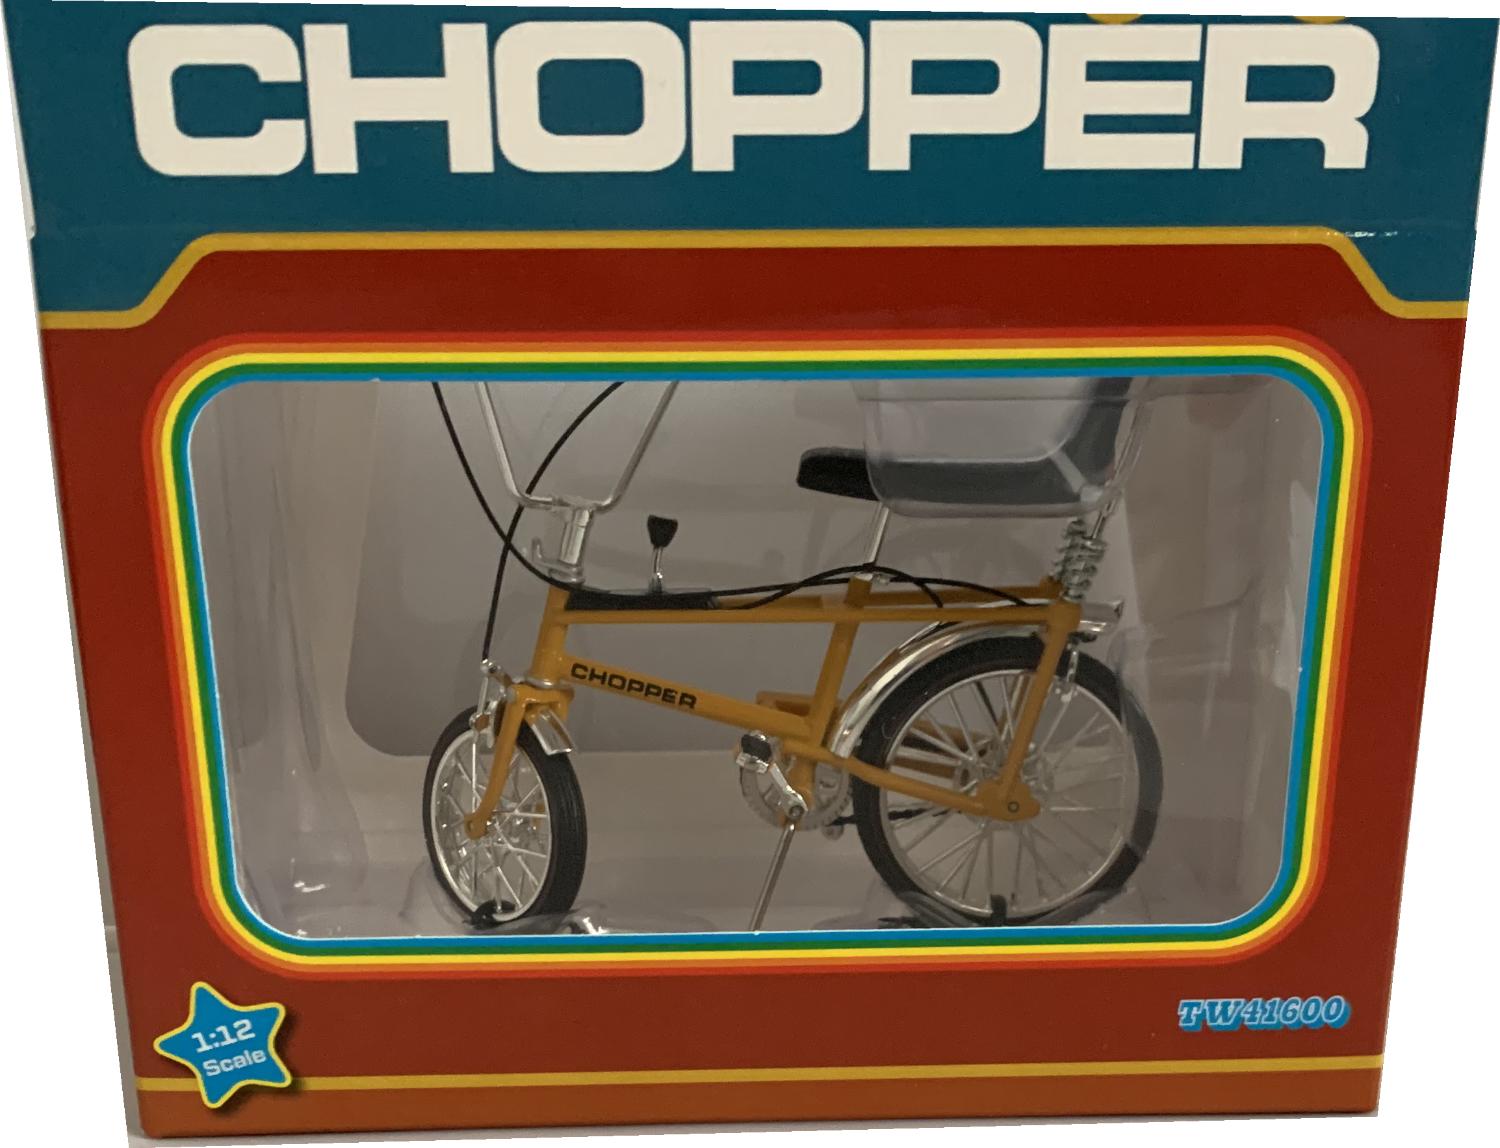 Chopper mk1 Classic 1970’s Bicycle in yellow 1:12 scale model from Toyway